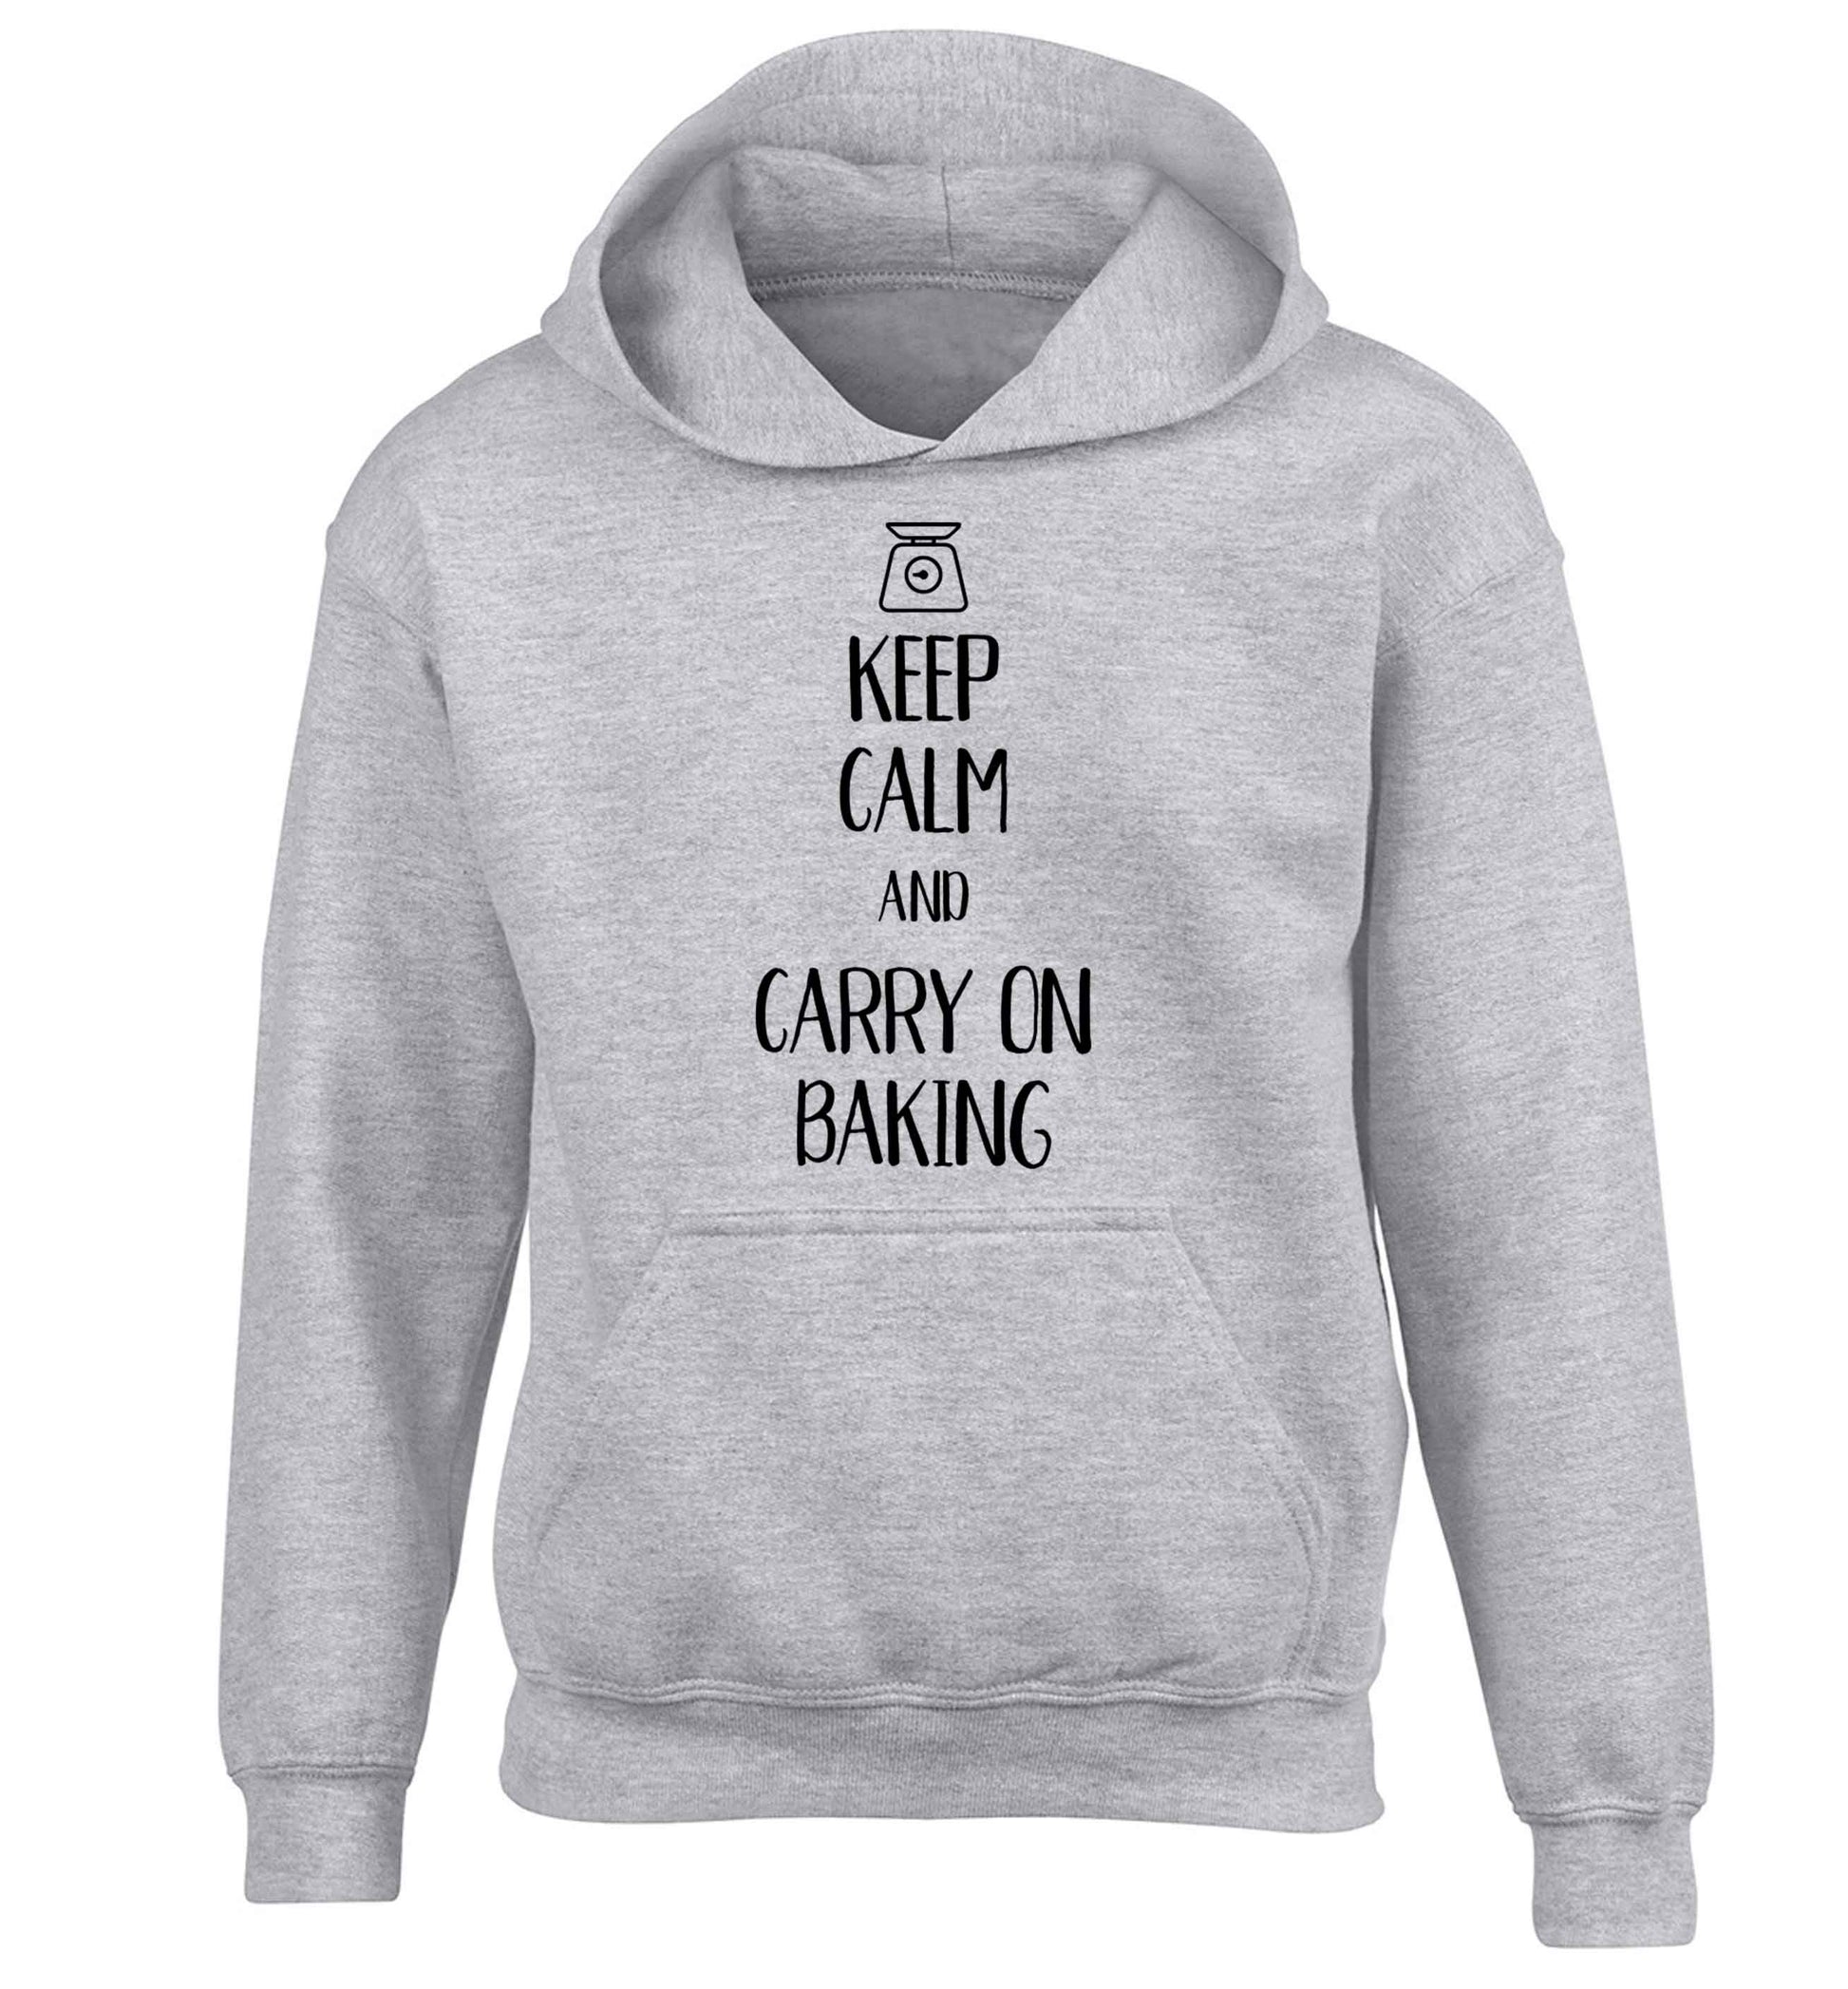 Keep calm and carry on baking children's grey hoodie 12-13 Years